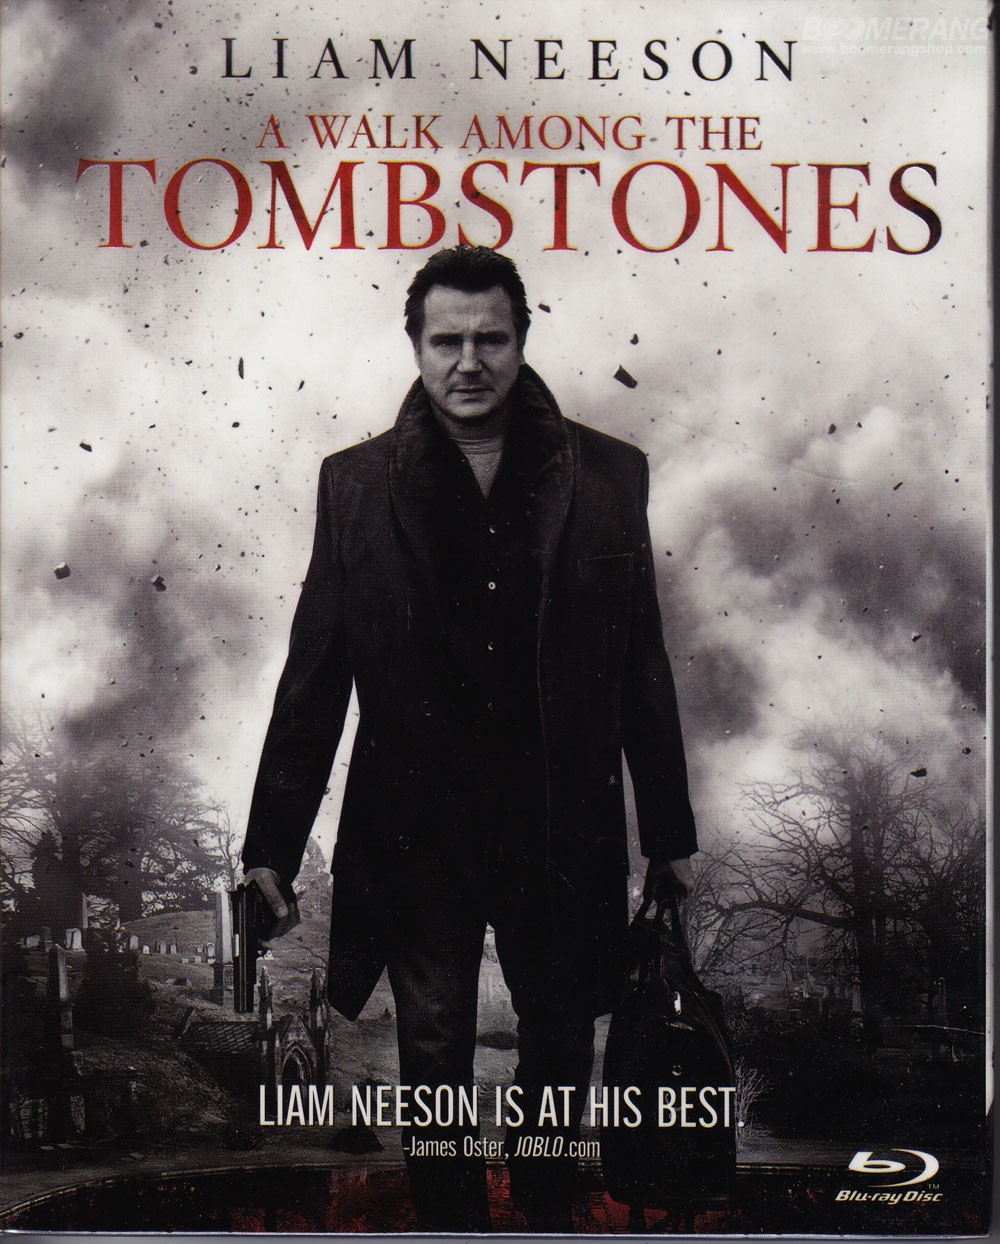 90 List A Walk Among The Tombstones Book Ending 